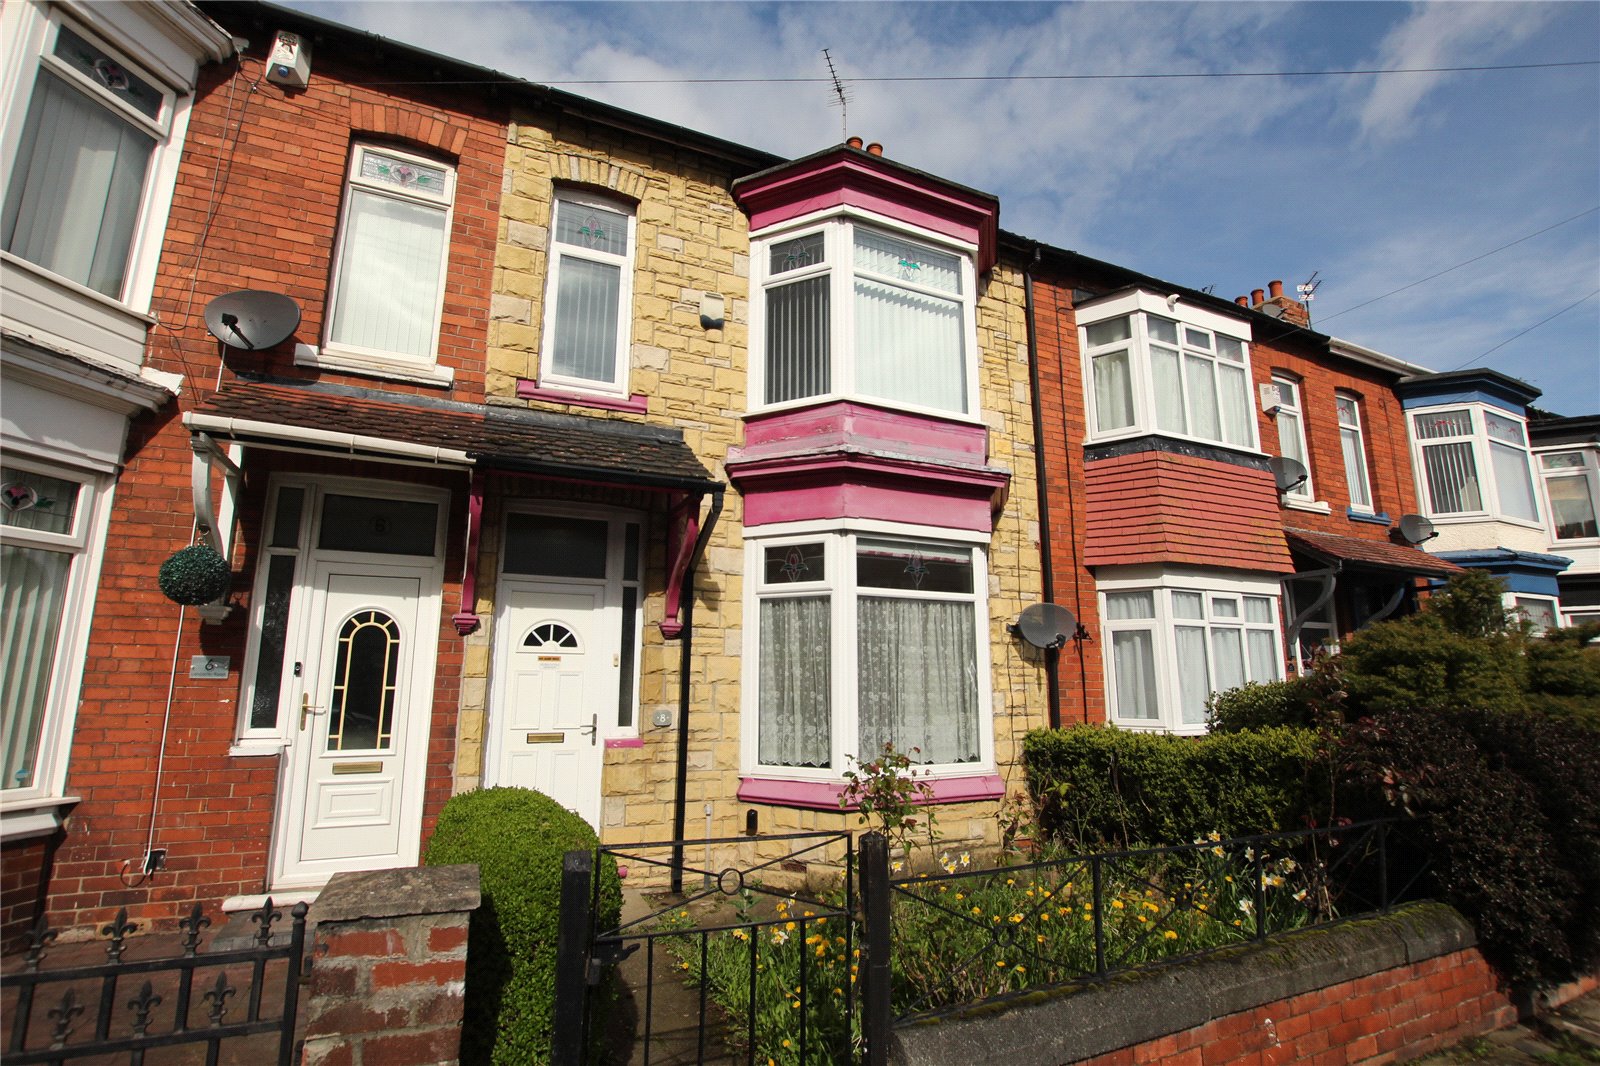 3 bed house for sale in Lancaster Road, Linthorpe - Property Image 1